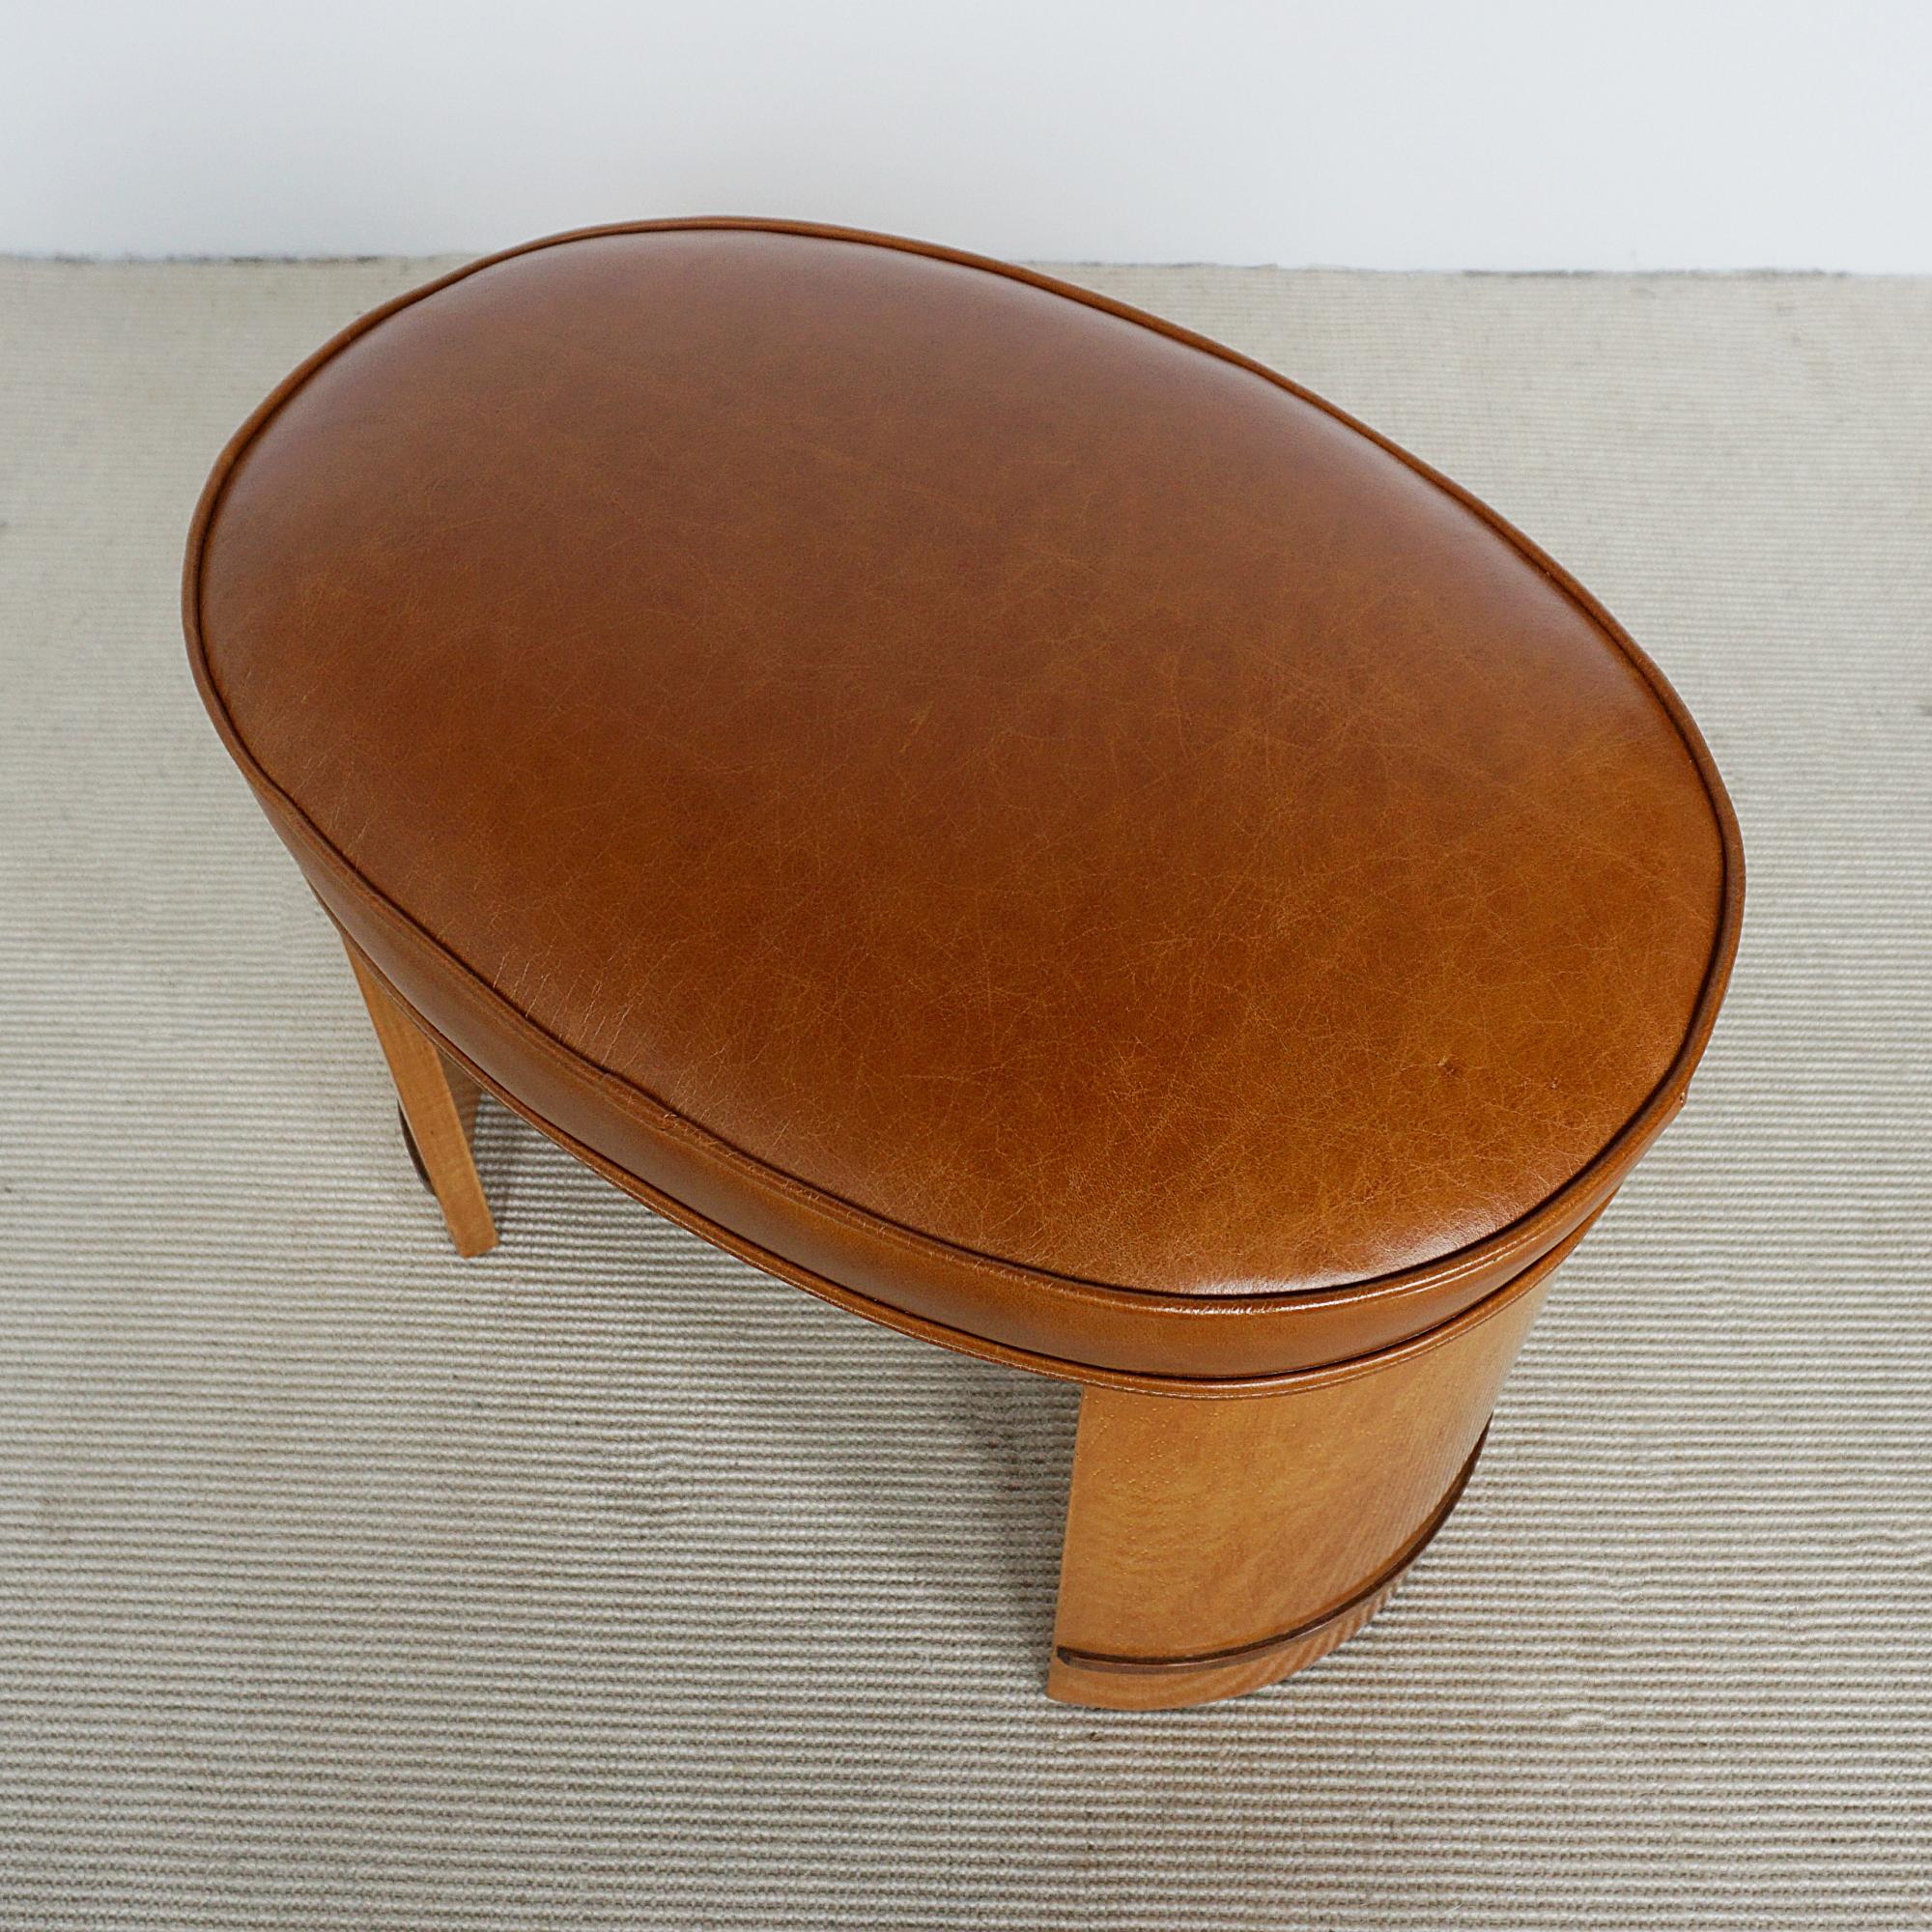 Art Deco Birdseye Maple Veneered Stool With Brown Leather Re-upholstery For Sale 4